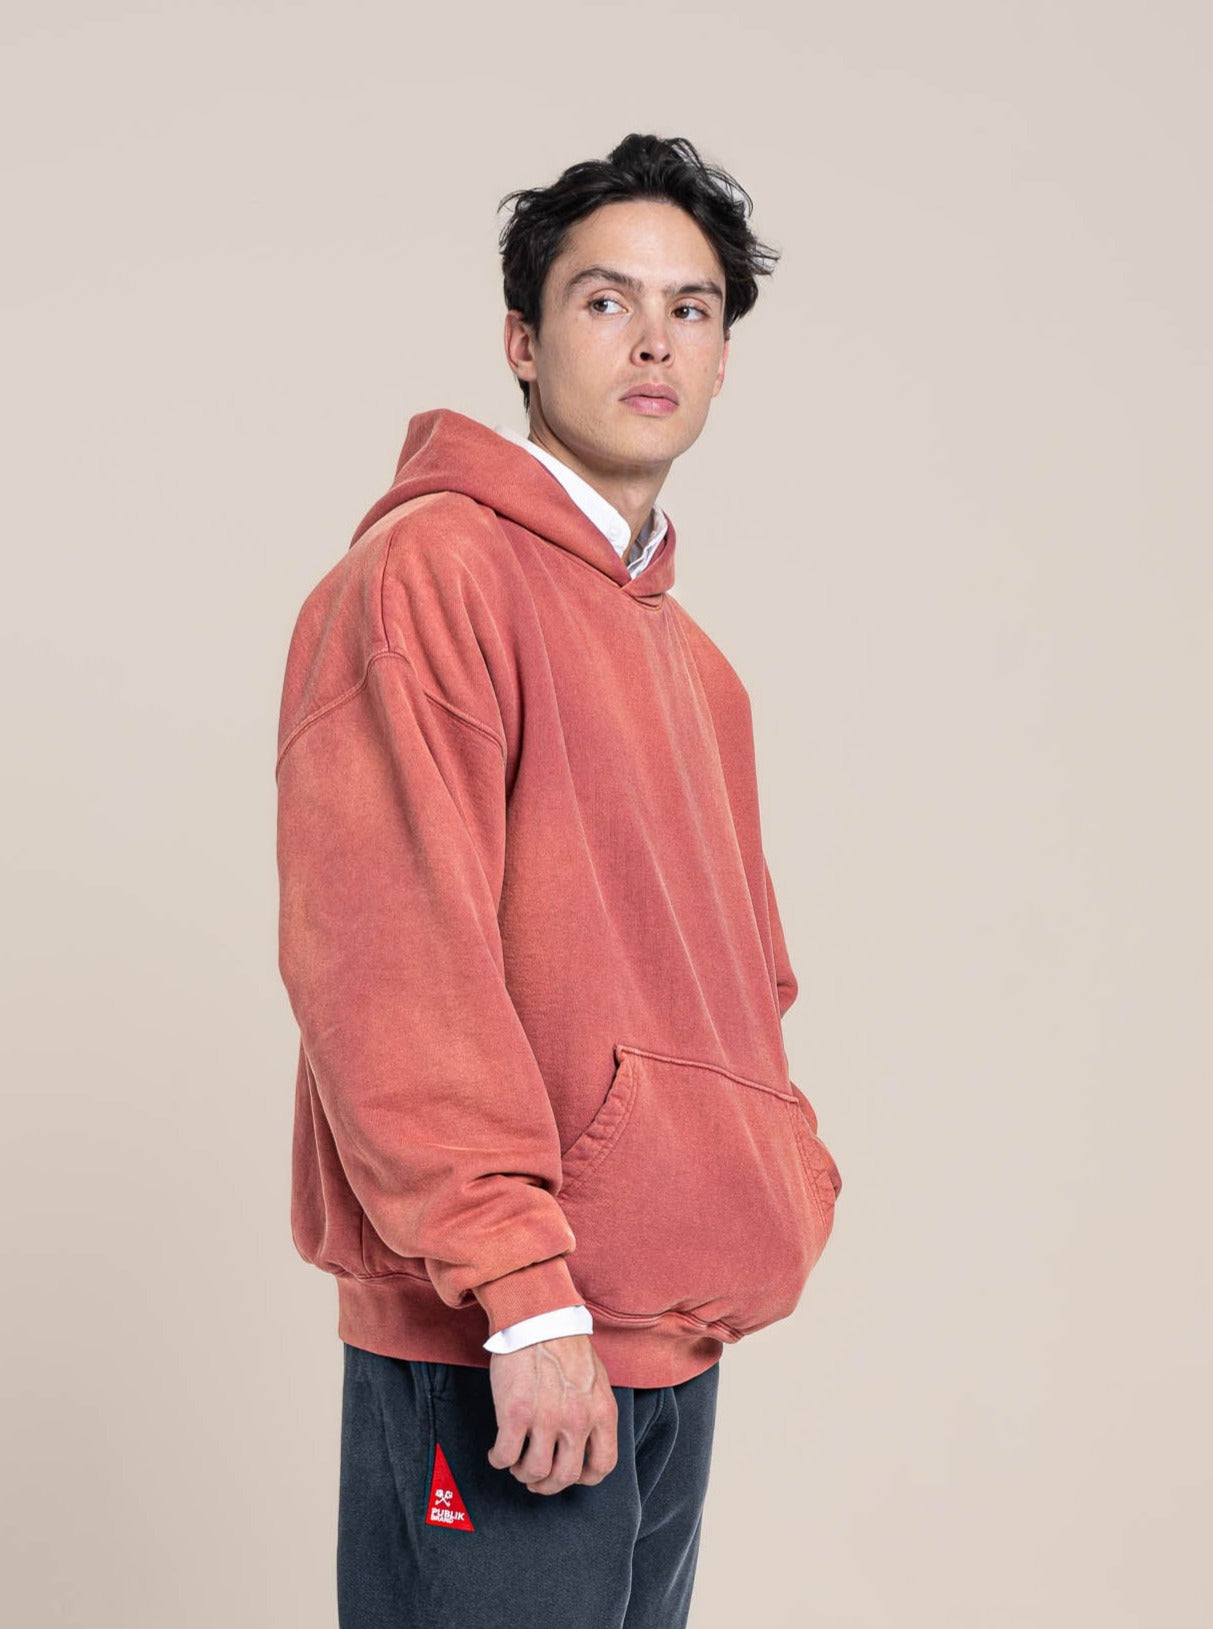 Publik Brand Double Layered Hoodie Tea Rose Red Heavyweight Fleece, all made in USA, Side view